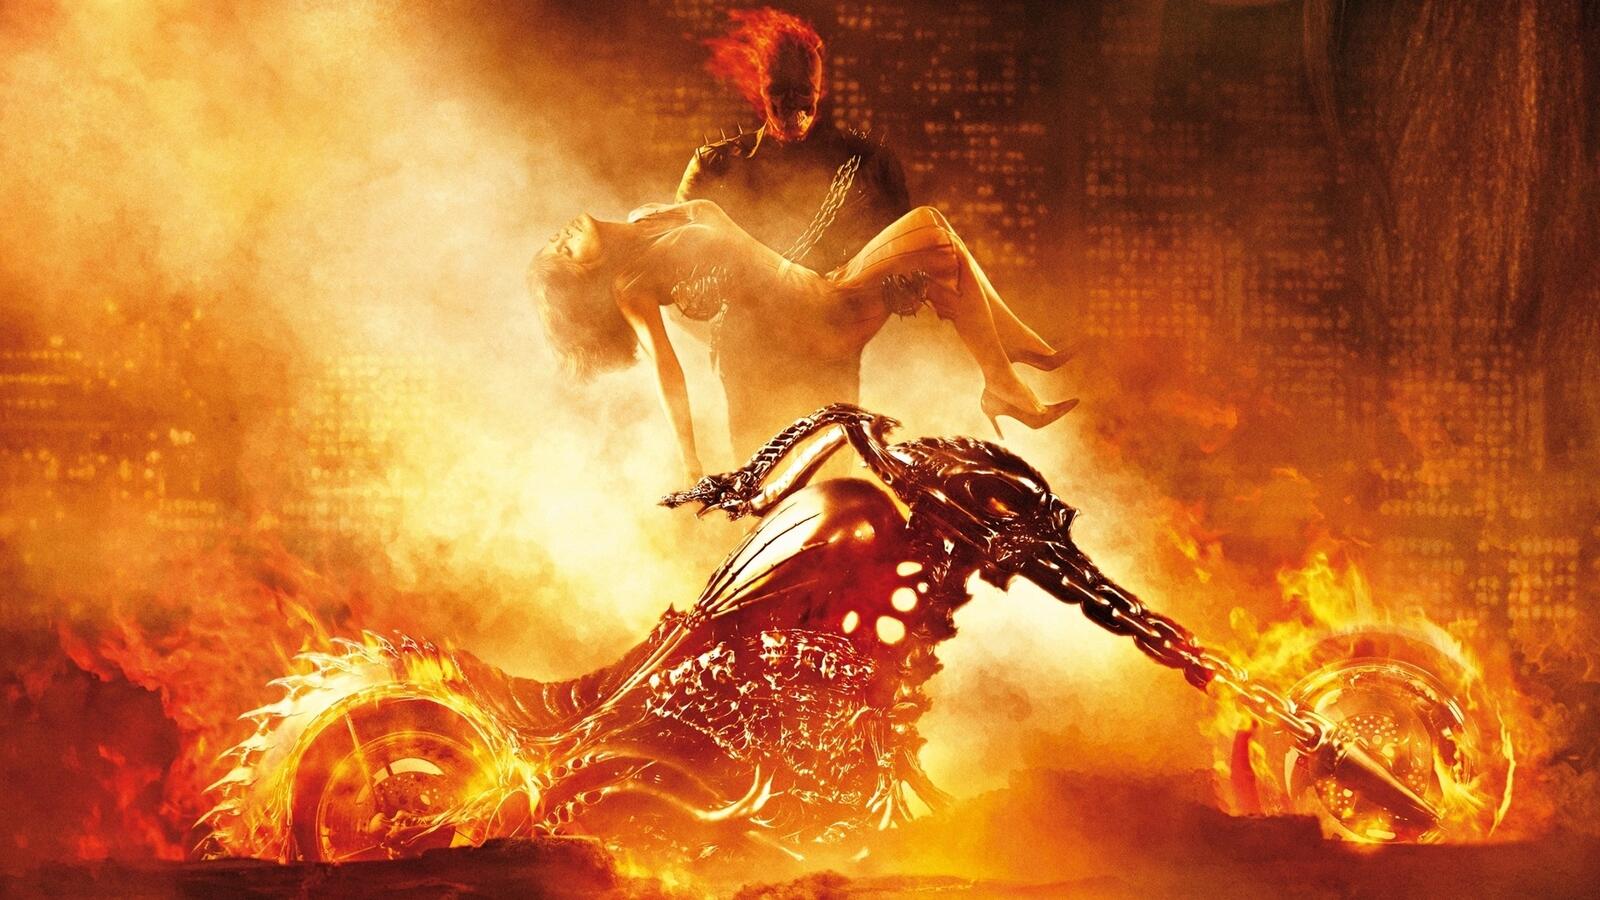 Wallpapers ghost rider fire ghost on the desktop